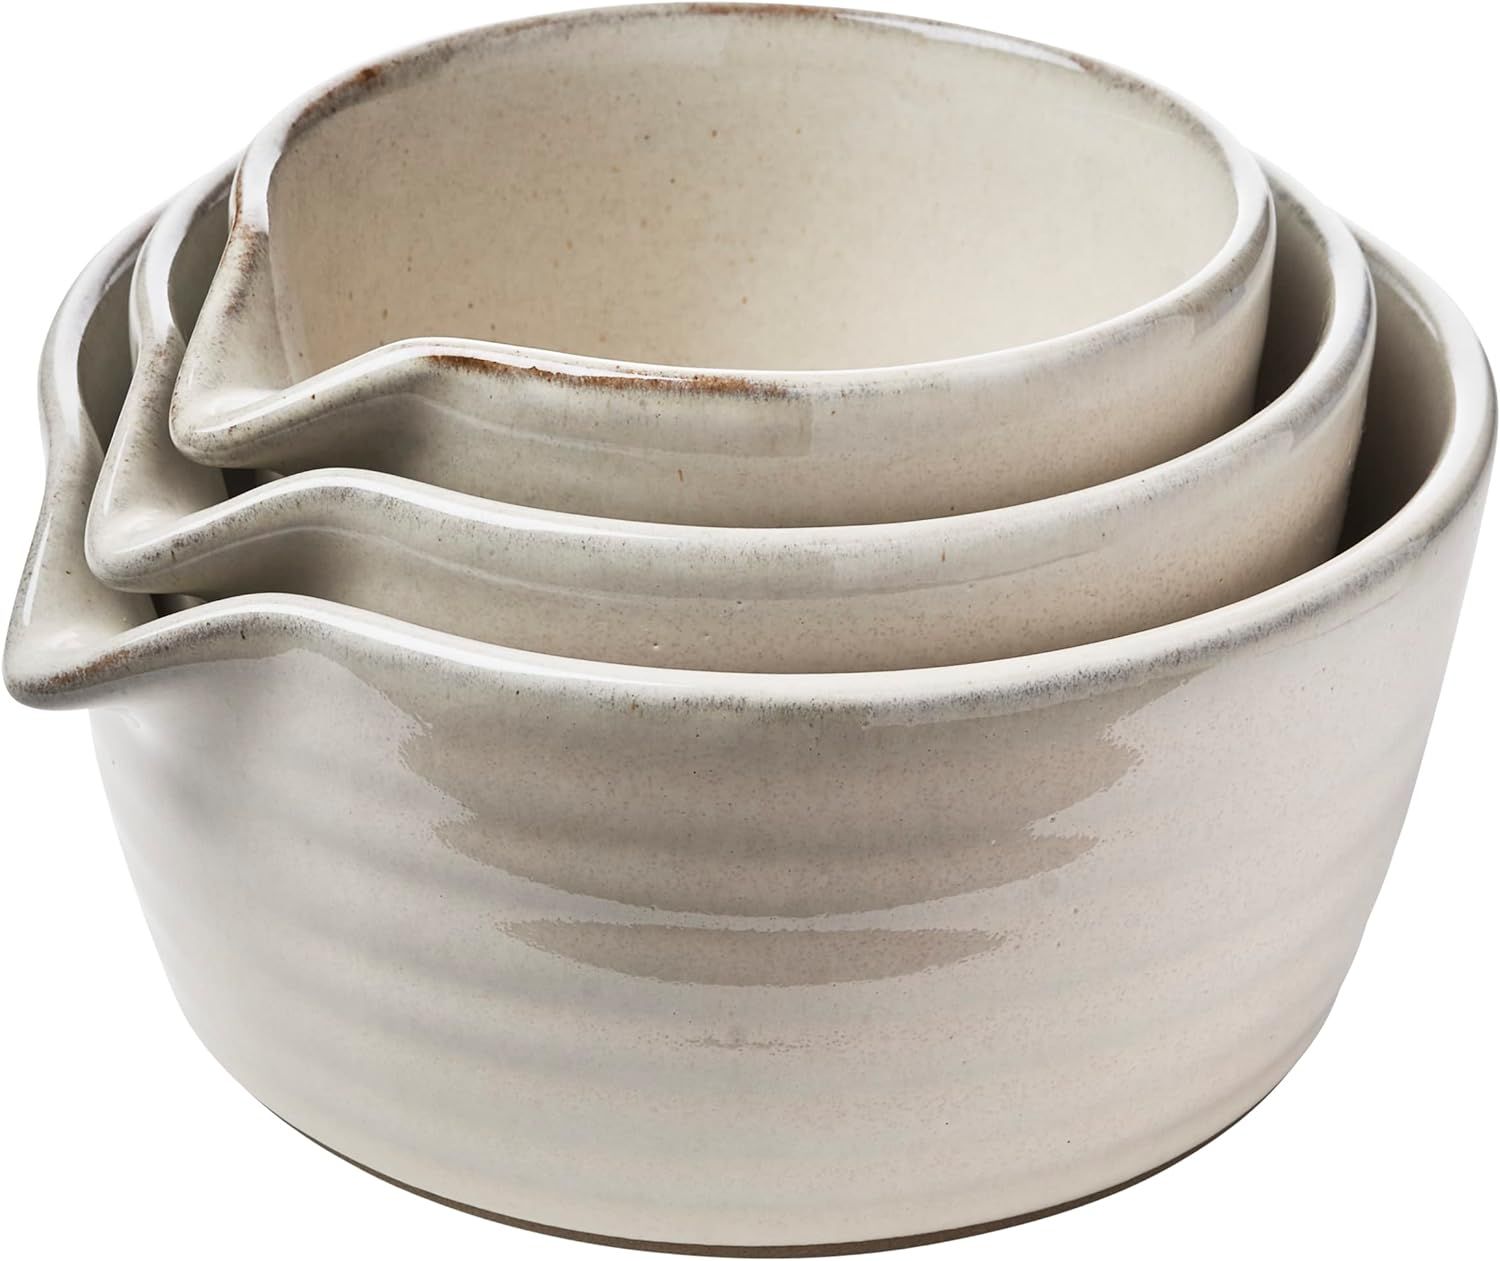 Monterey by Citrine Spouted Prep Bowls, Ceramic-Stoneware Mixing Bowls, Set of 3 | Amazon (US)